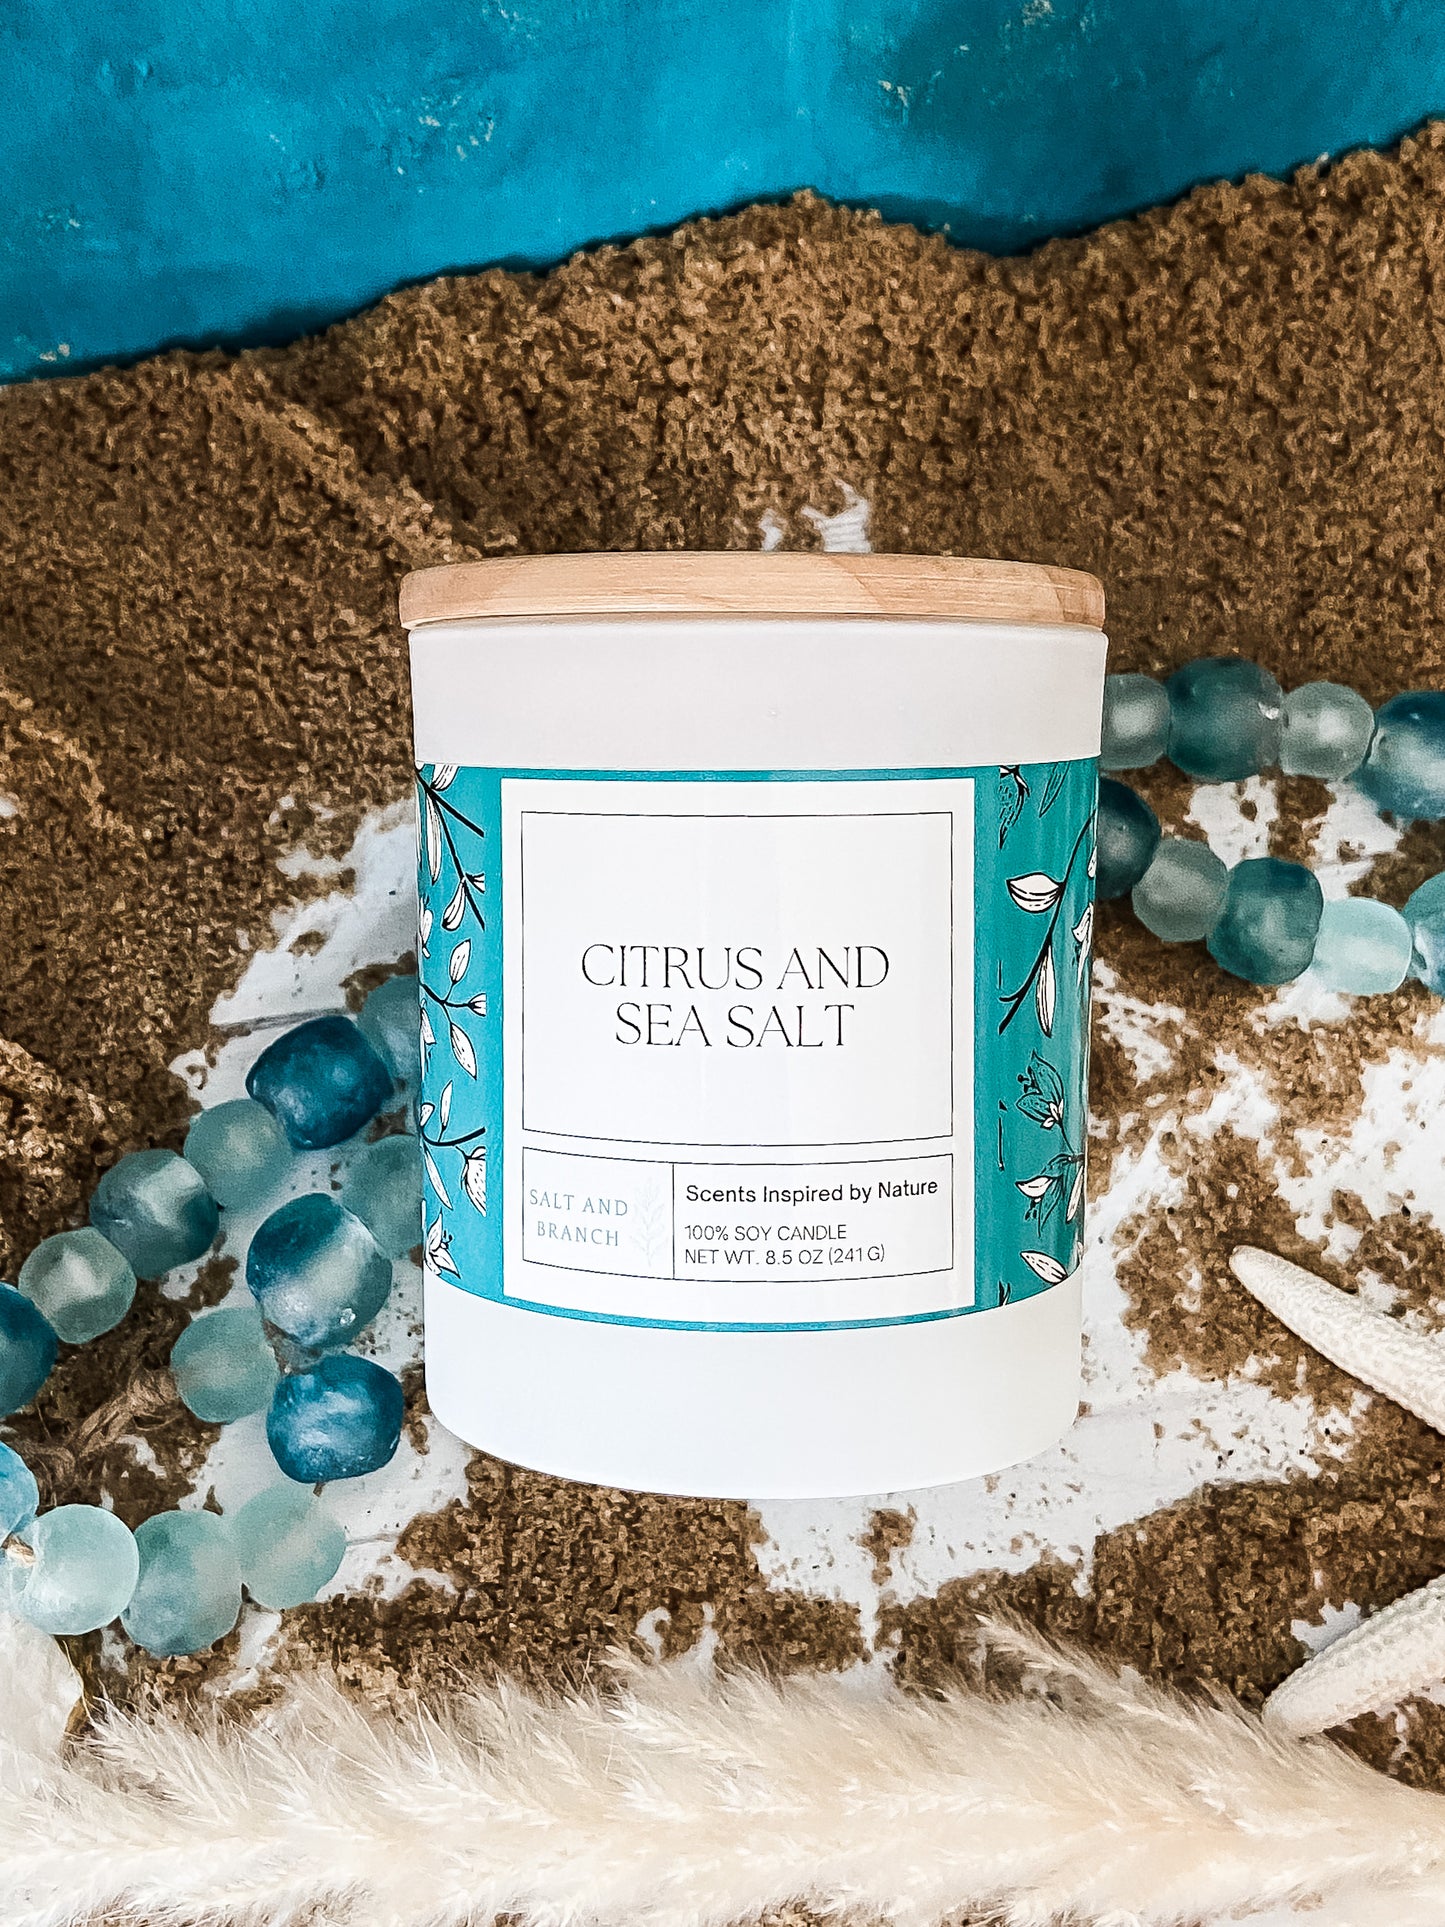 Citrus and Sea Salt Soy Candle - Salt and Branch